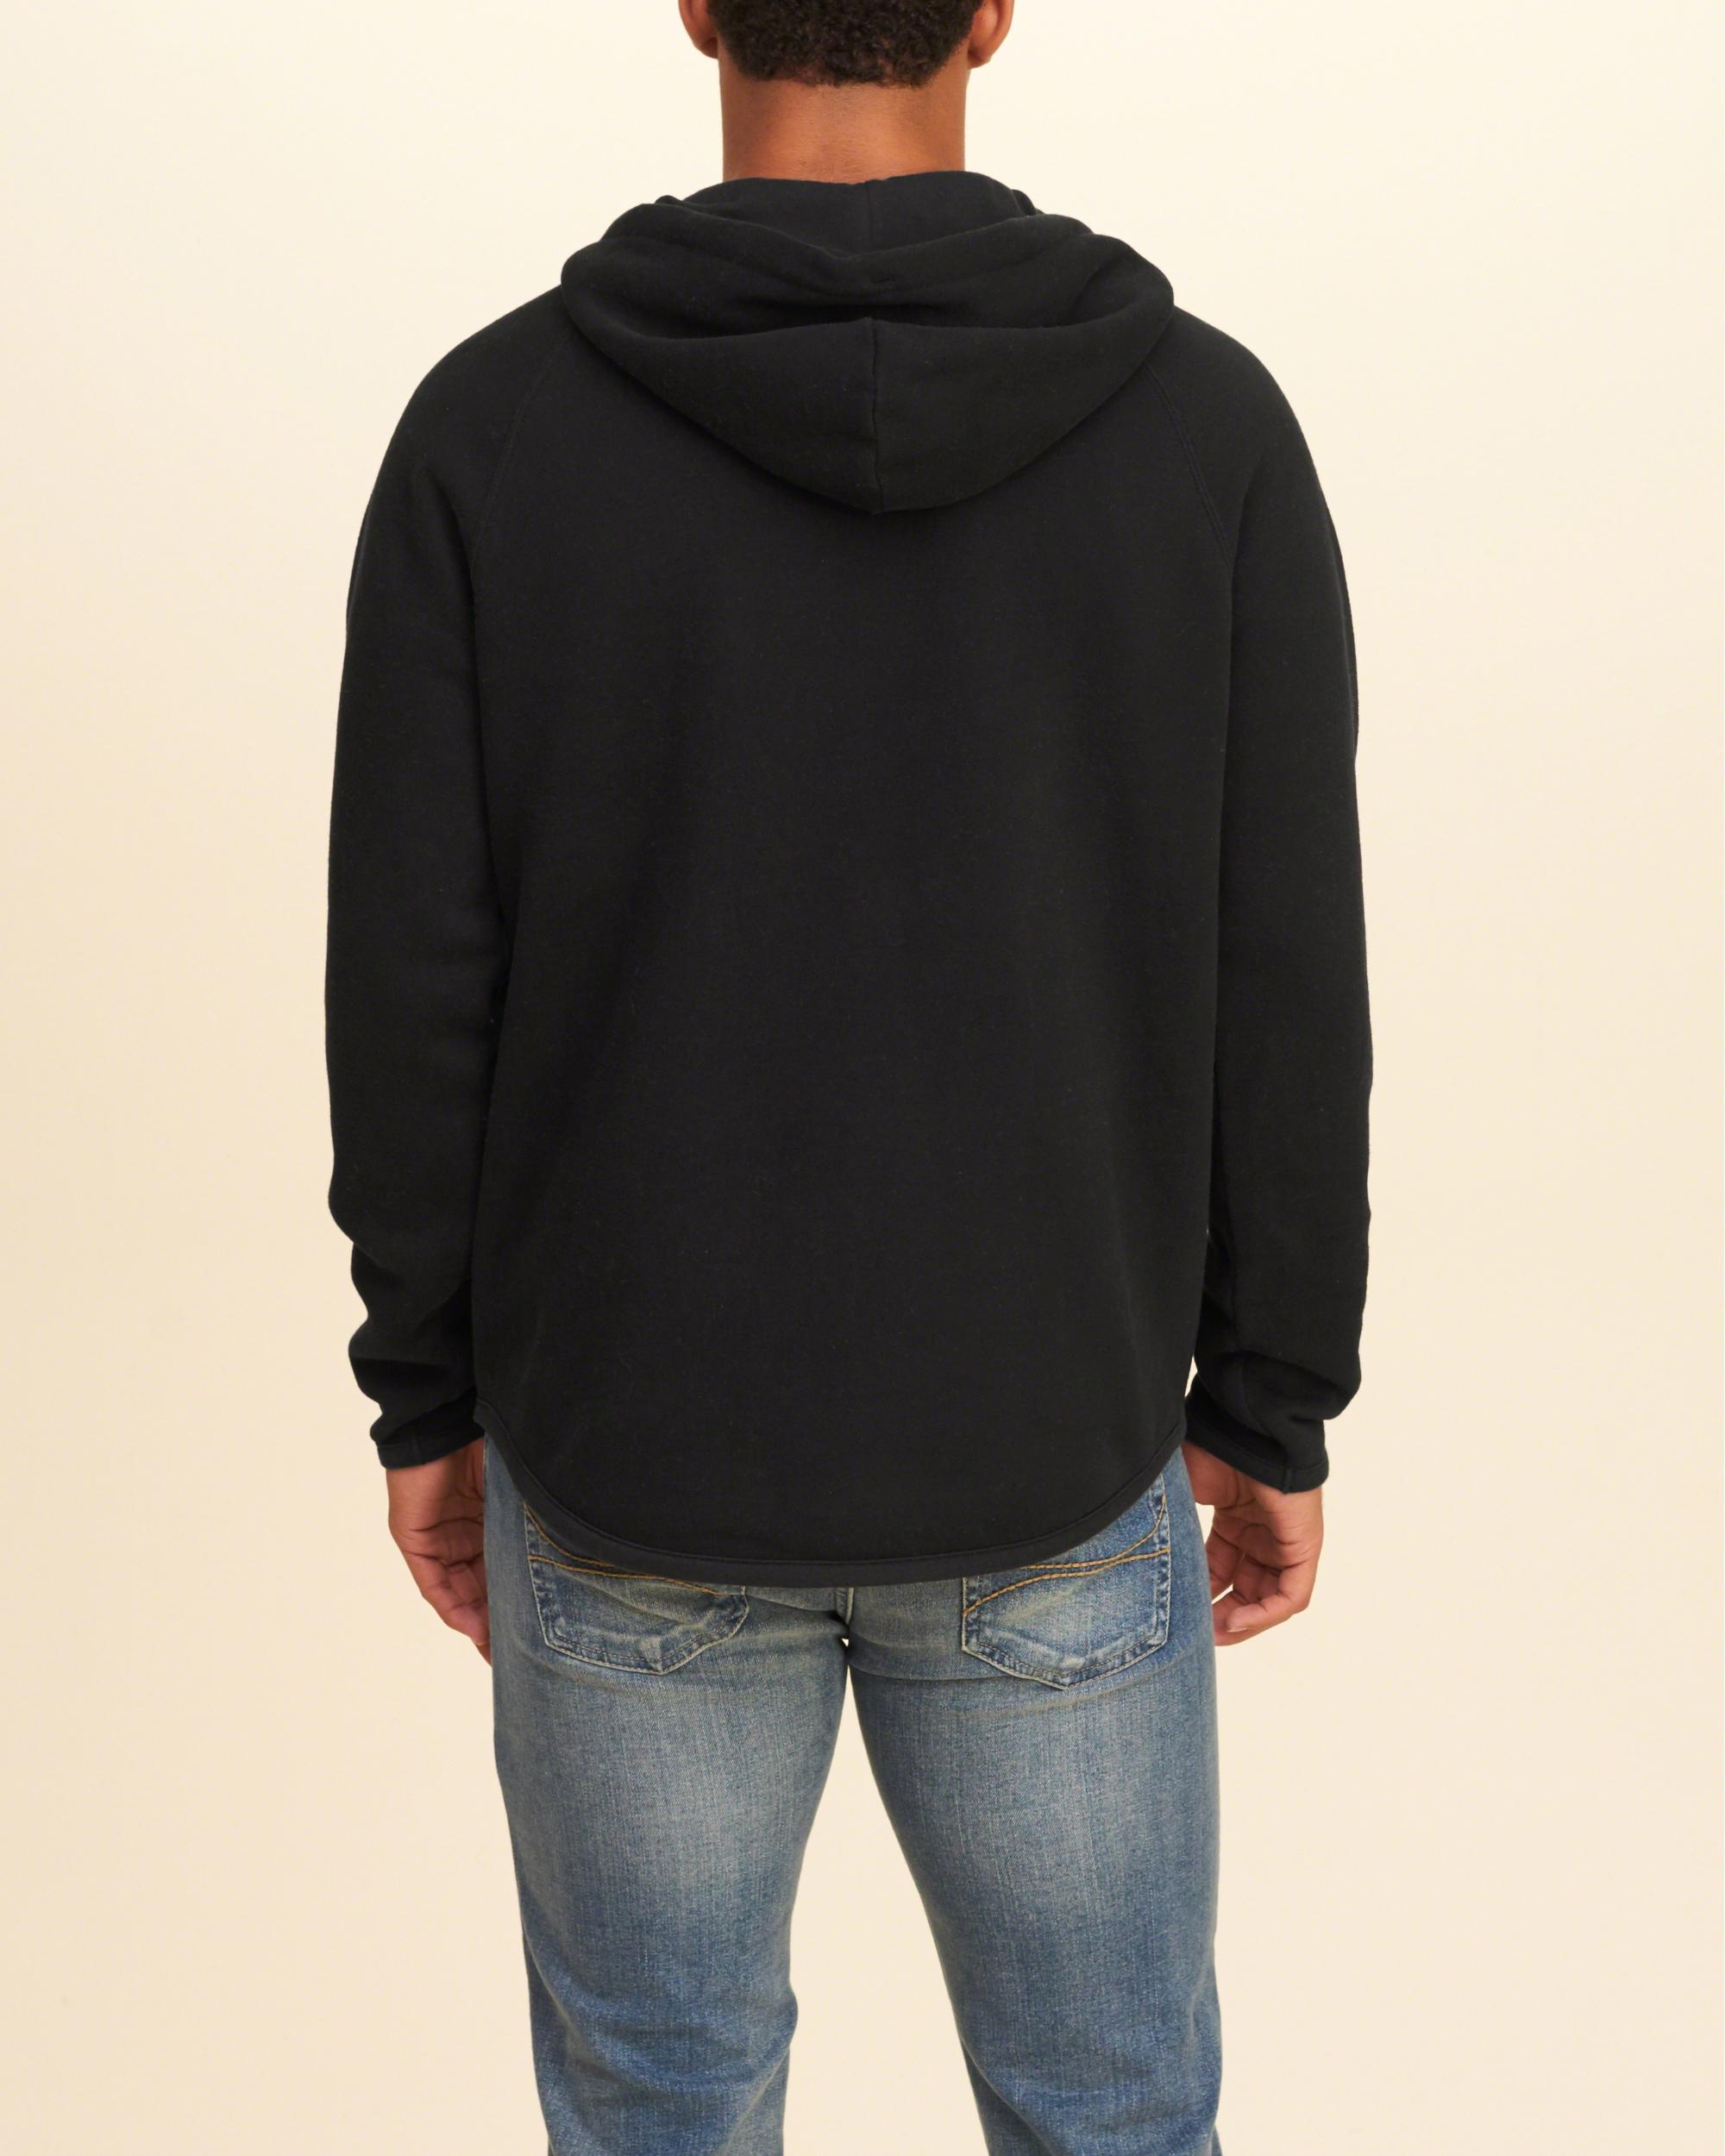 Lyst - Hollister Textured Icon Hoodie in Black for Men